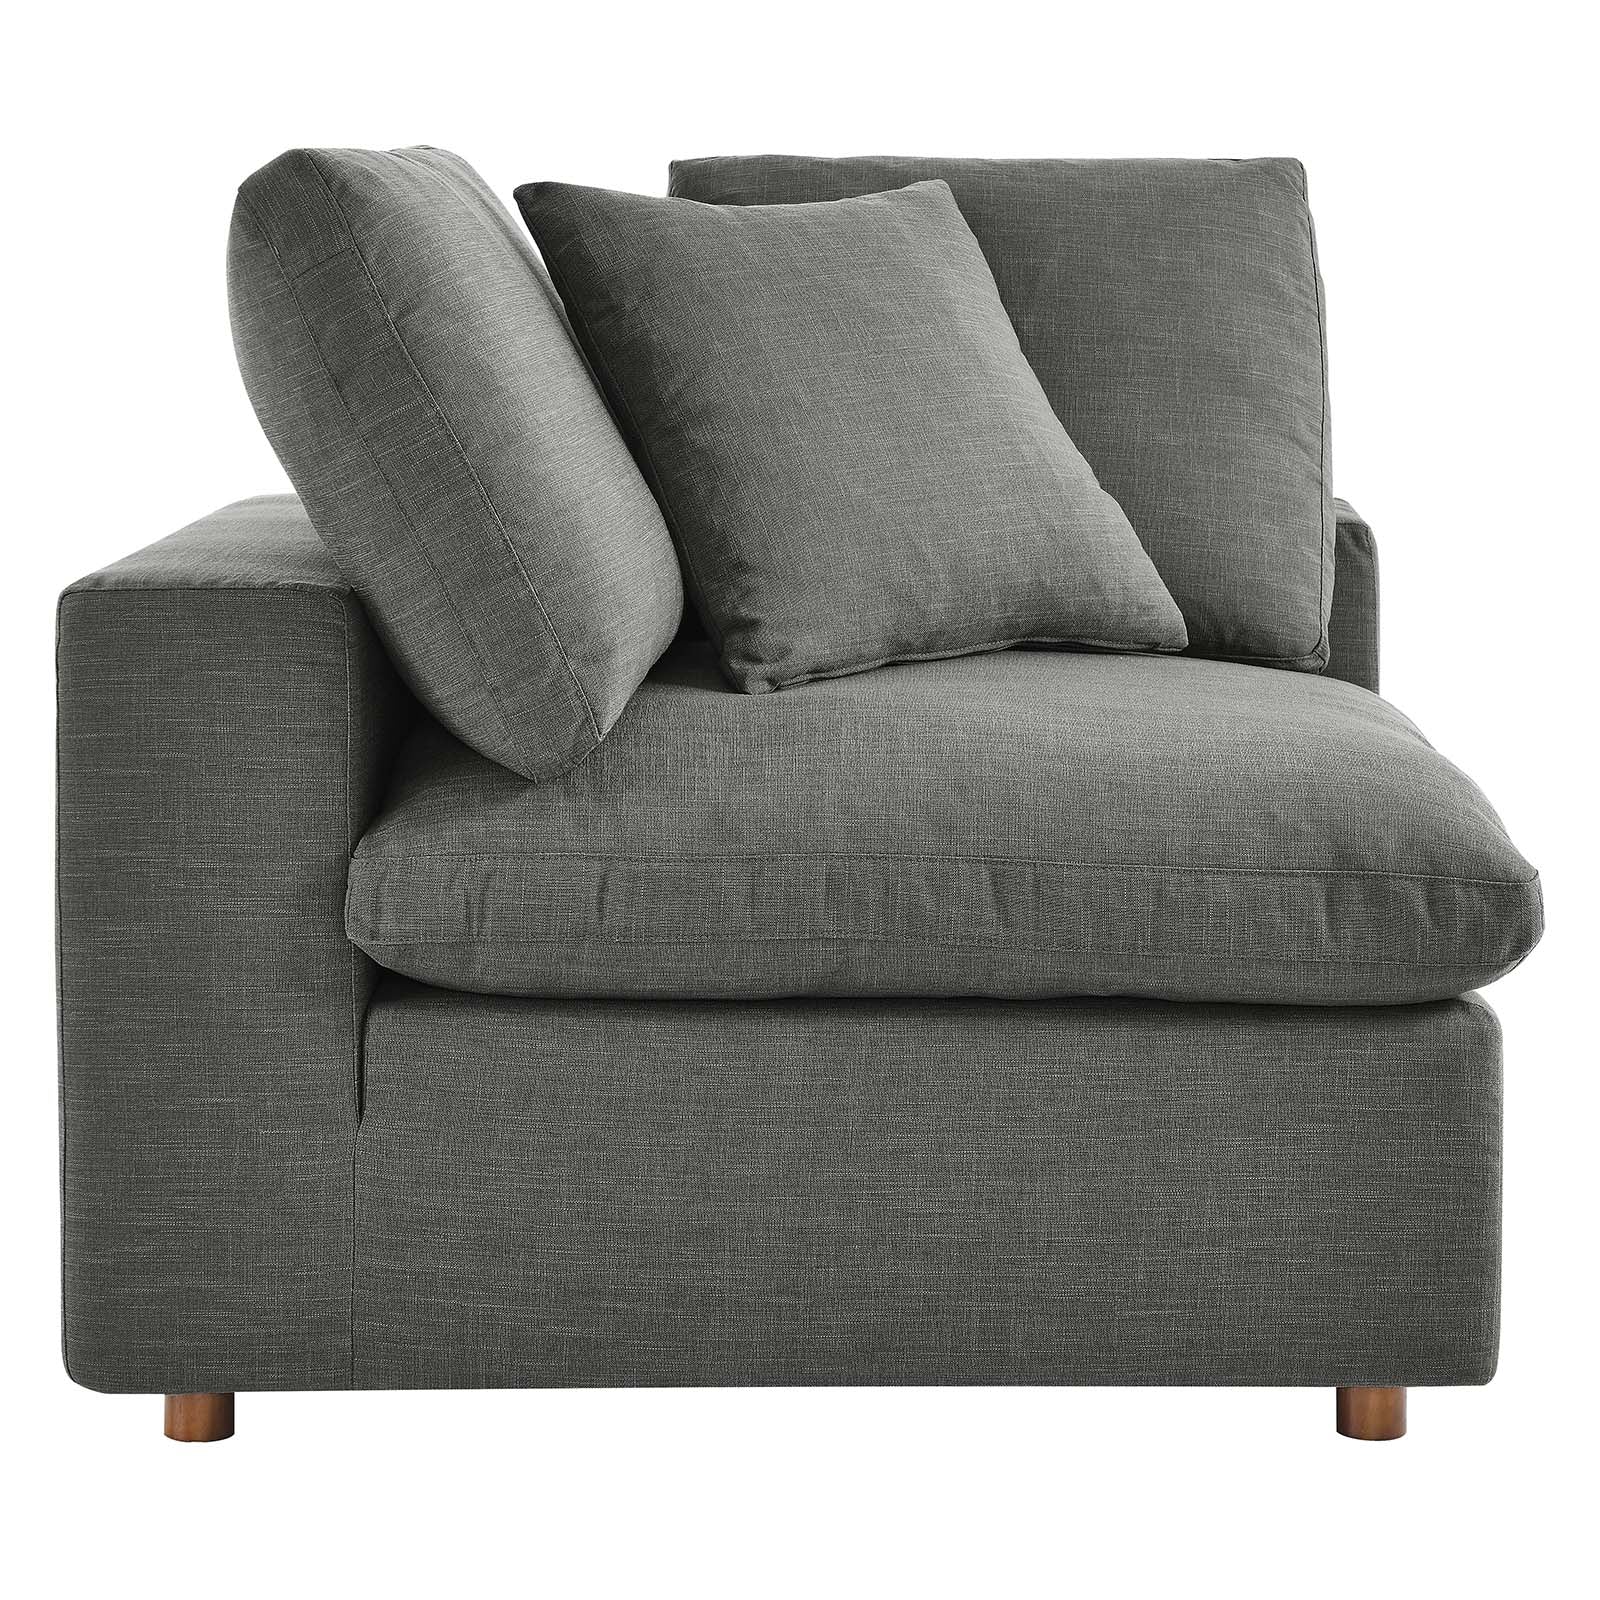 Modway Accent Chairs - Commix Down Filled Overstuffed Corner Chair Gray